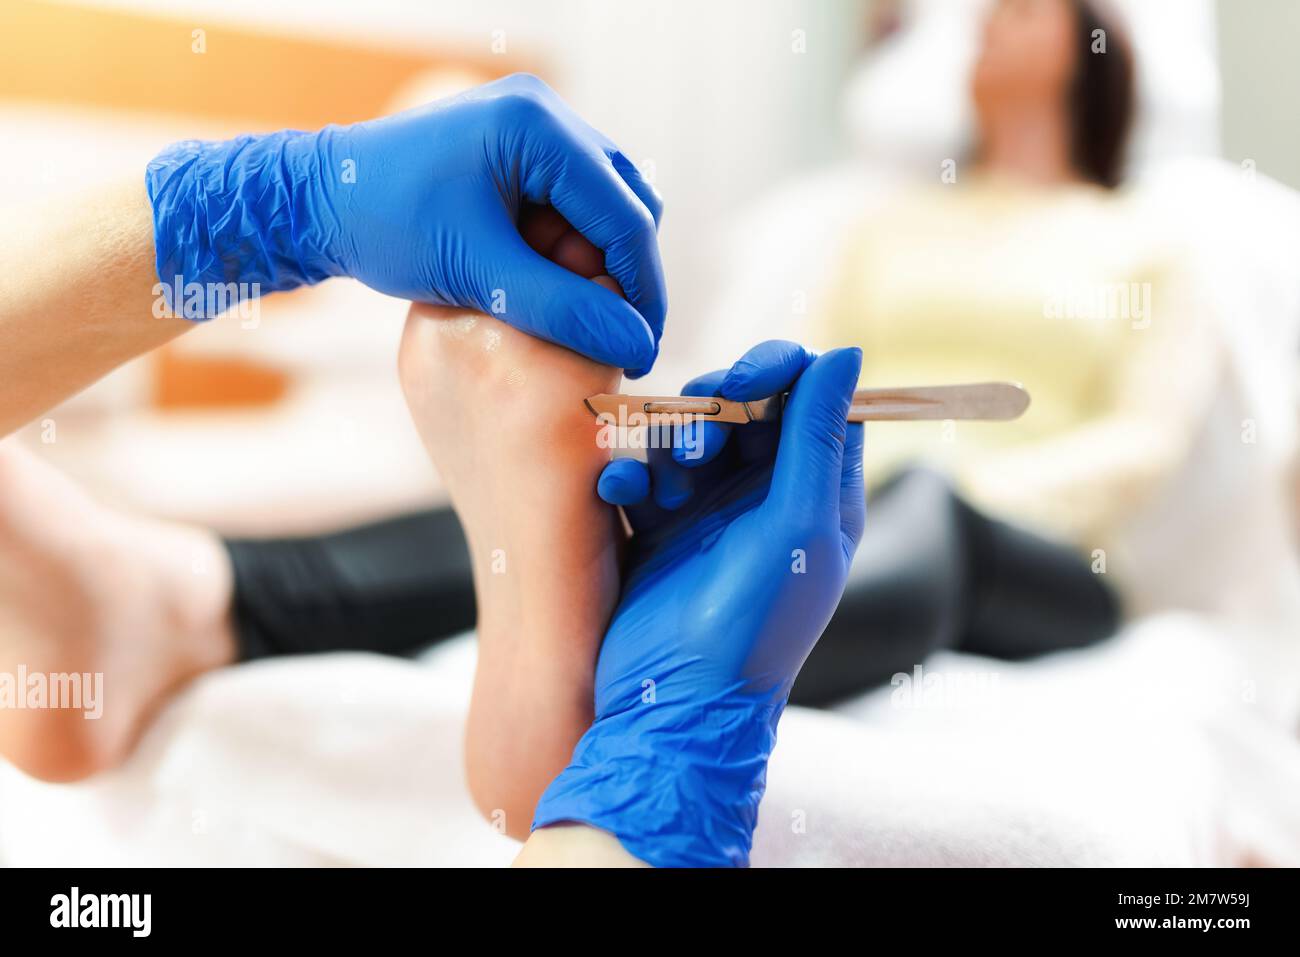 https://c8.alamy.com/comp/2M7W59J/professional-pedicure-using-dieffenbach-scalpelpatient-visiting-podiatristmedical-pedicure-procedure-using-special-instrument-with-blade-knife-holde-2M7W59J.jpg